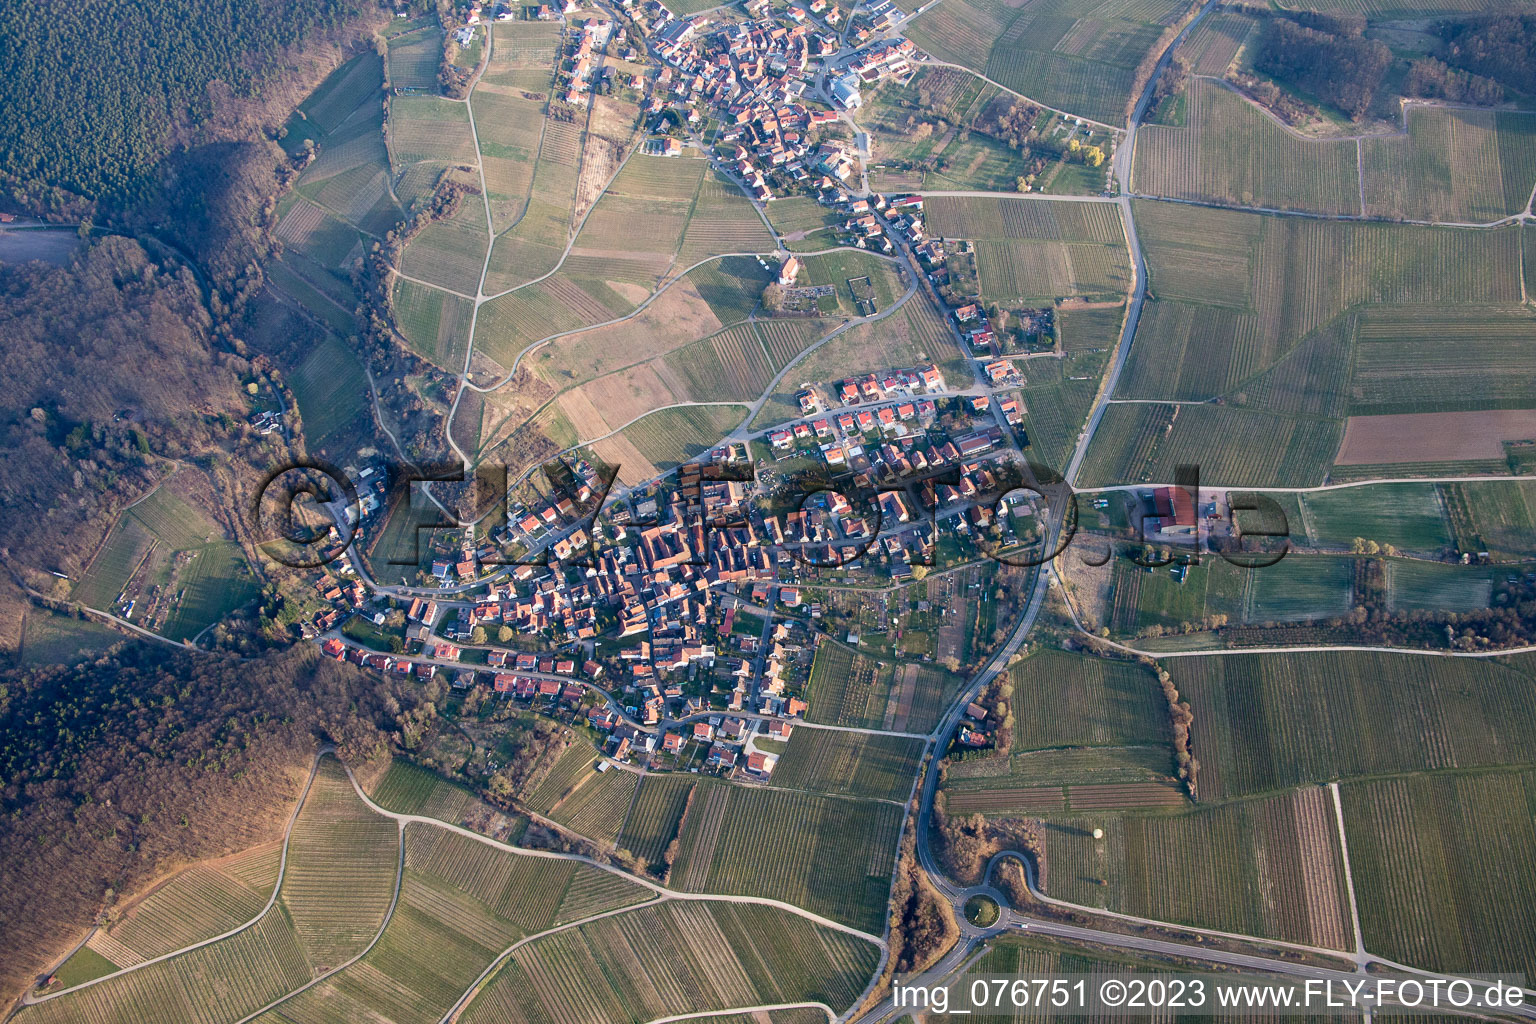 Aerial view of District Gleishorbach in Gleiszellen-Gleishorbach in the state Rhineland-Palatinate, Germany